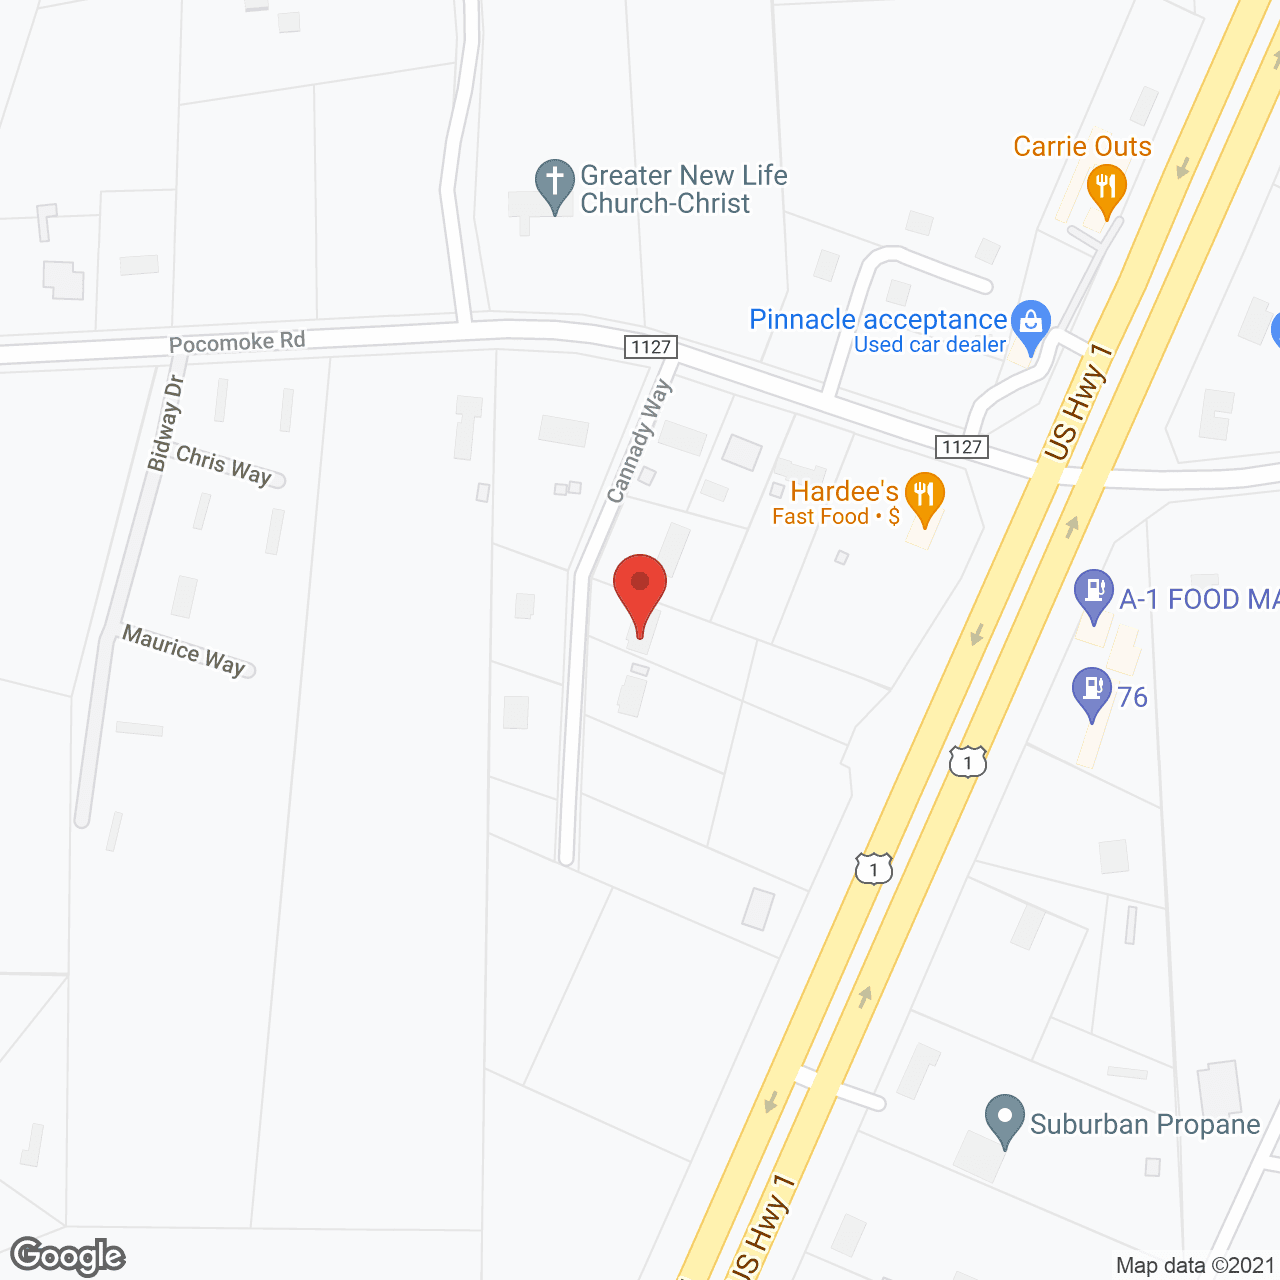 Divine Family Care at Cannady Way in google map